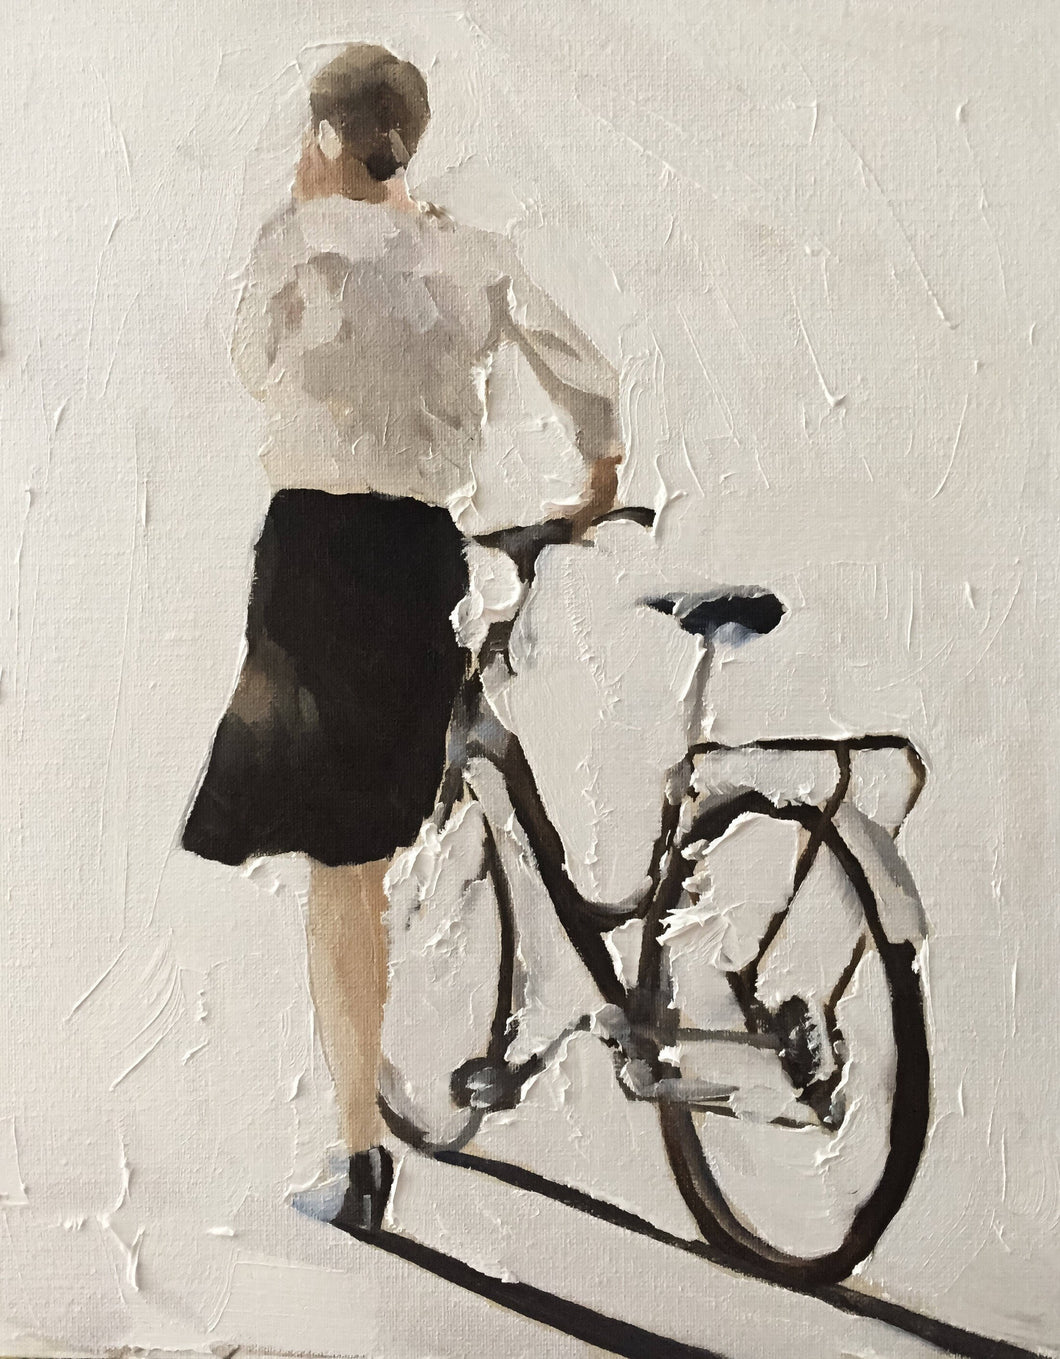 Women with bike,Prints, Canvas, Posters, Originals, Commissions - Fine Art - from original oil painting by James Coates